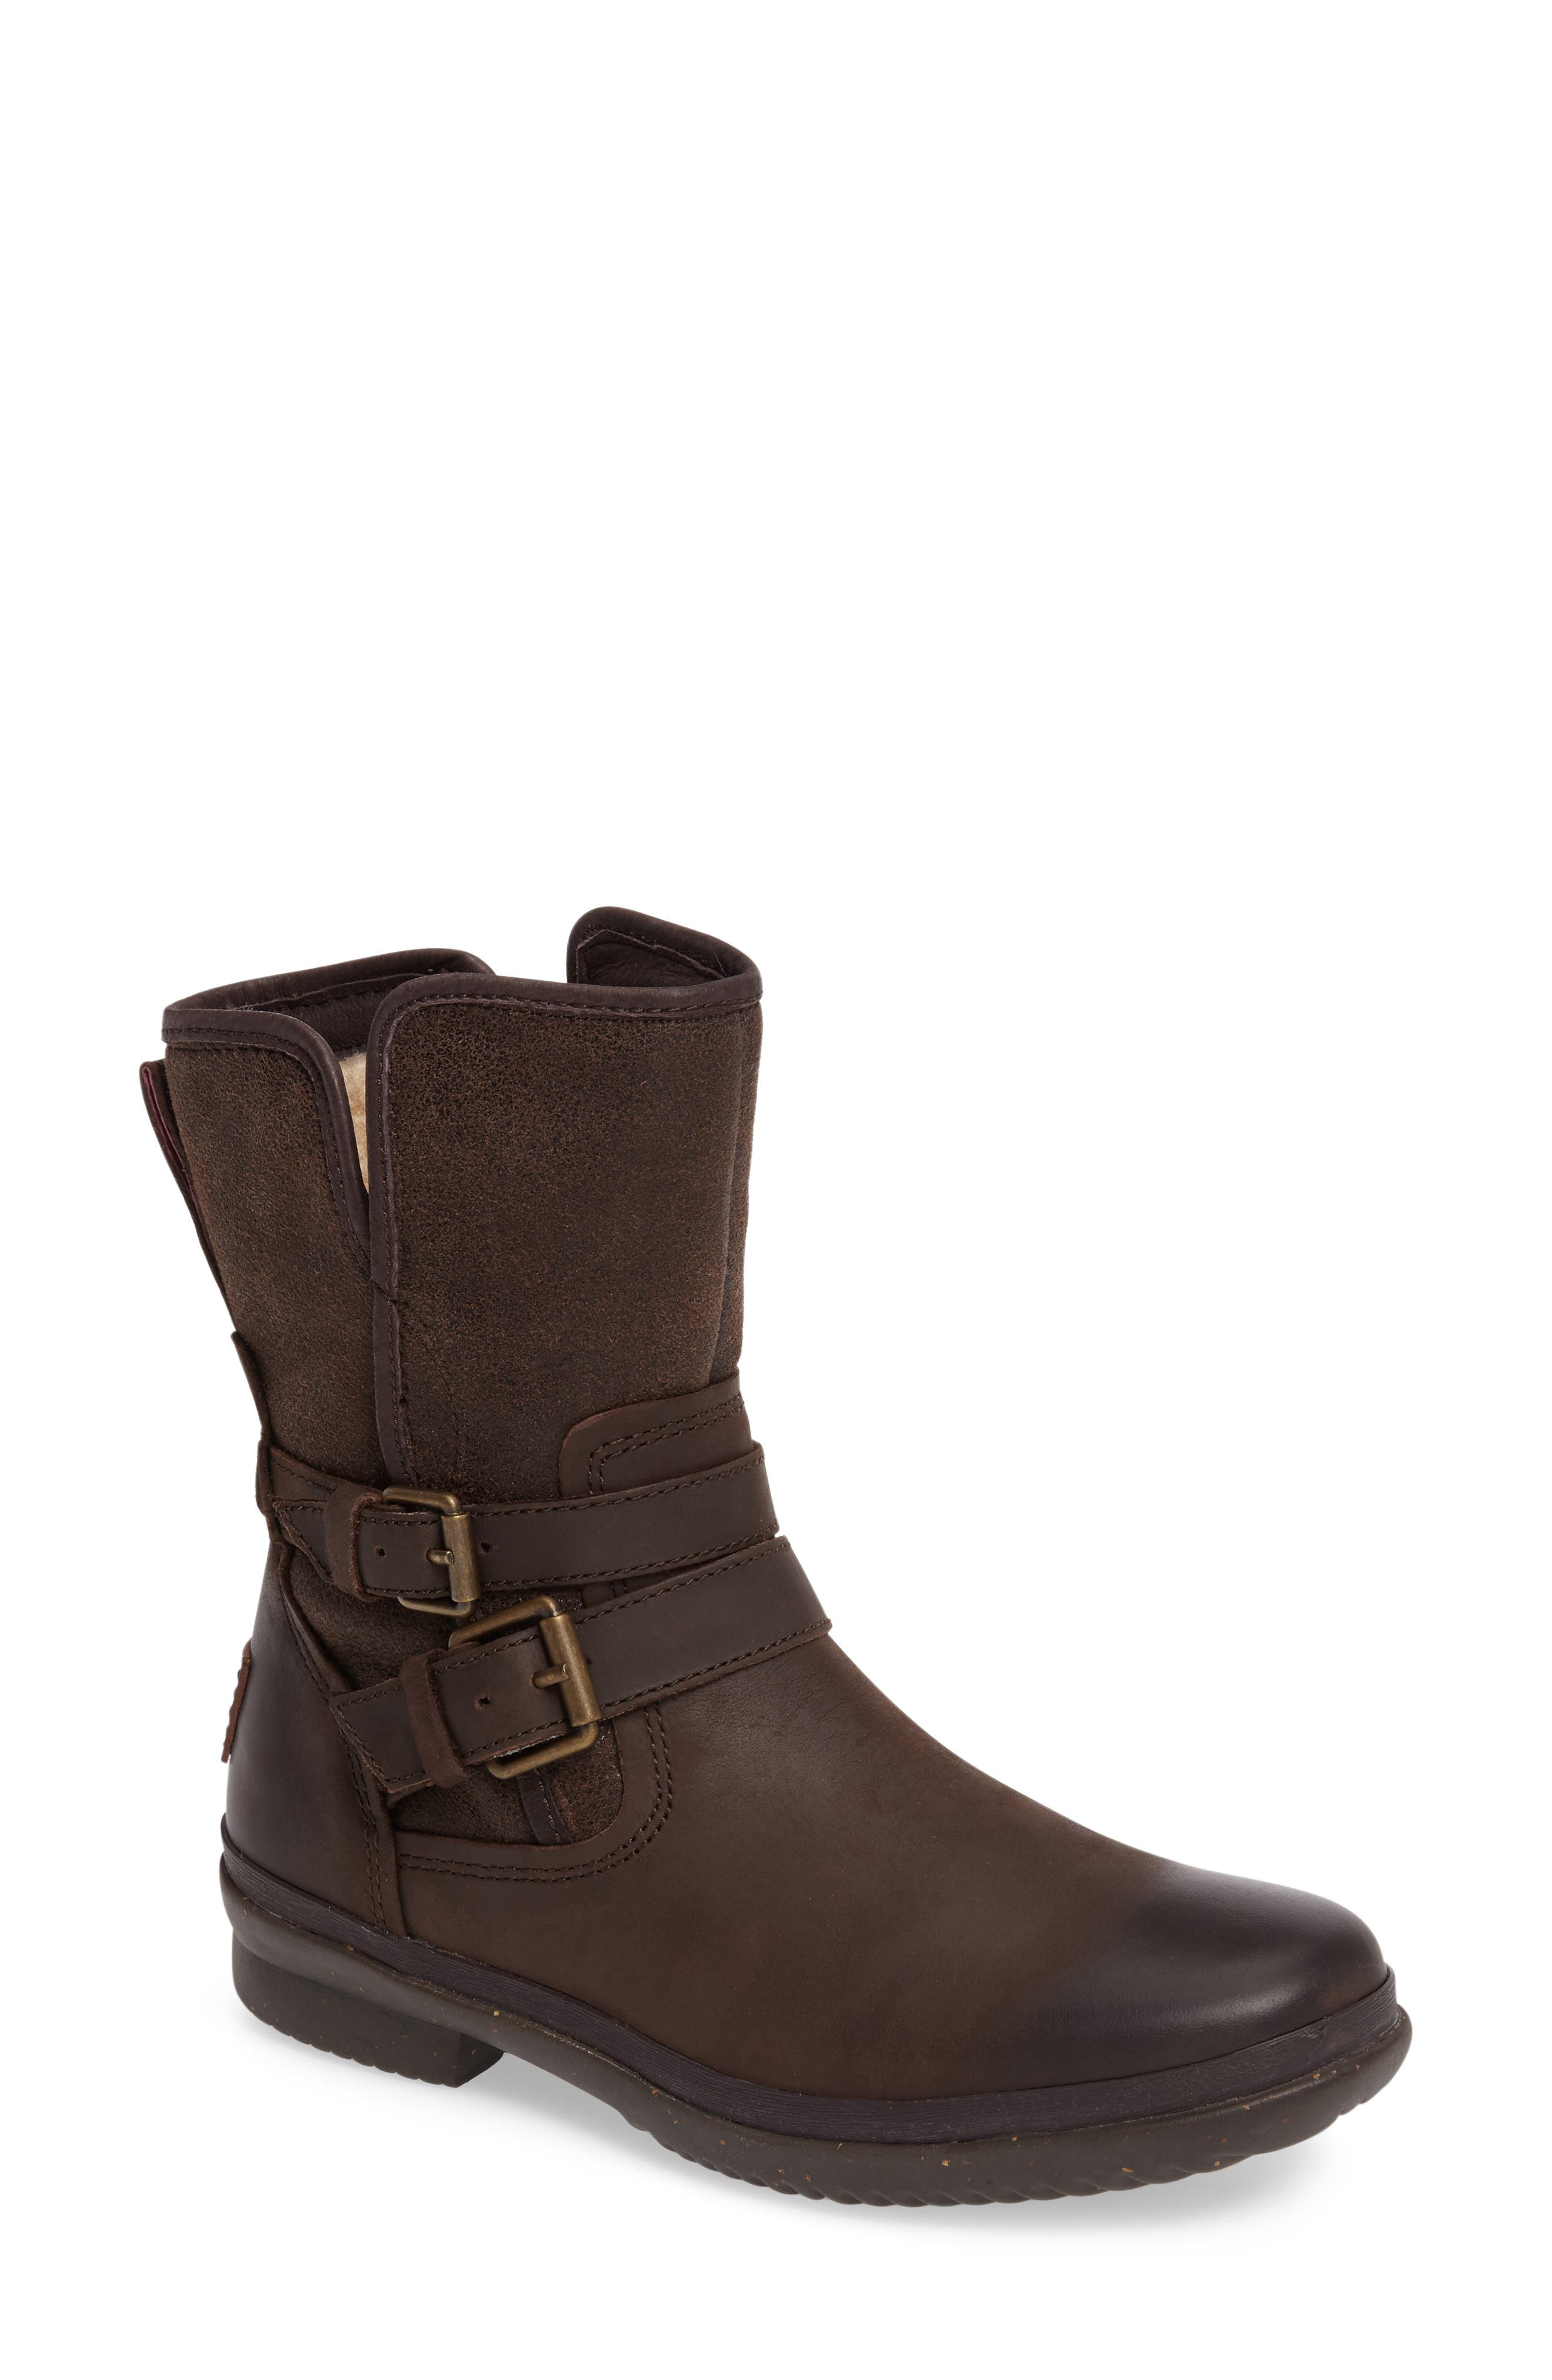 ugg women's simmens leather boot